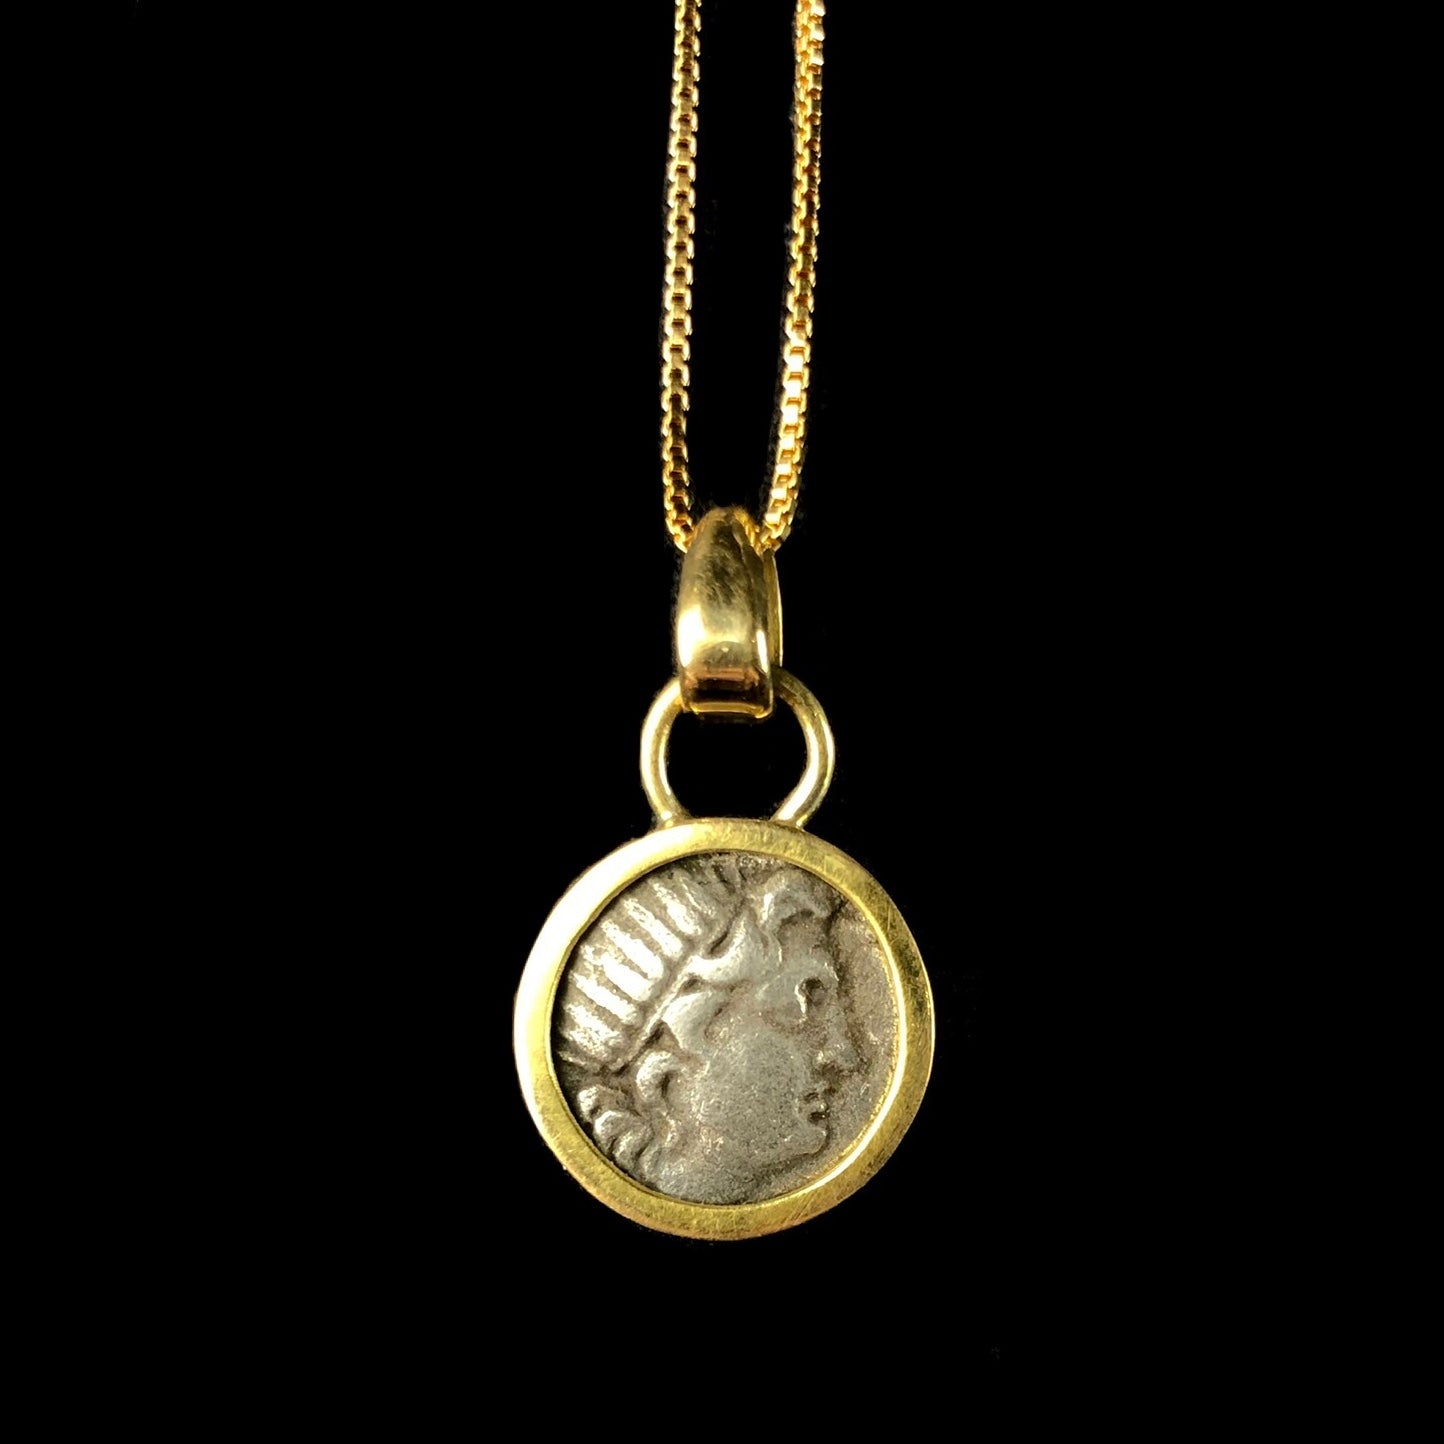 The radiate head of Helios in silver with gold setting